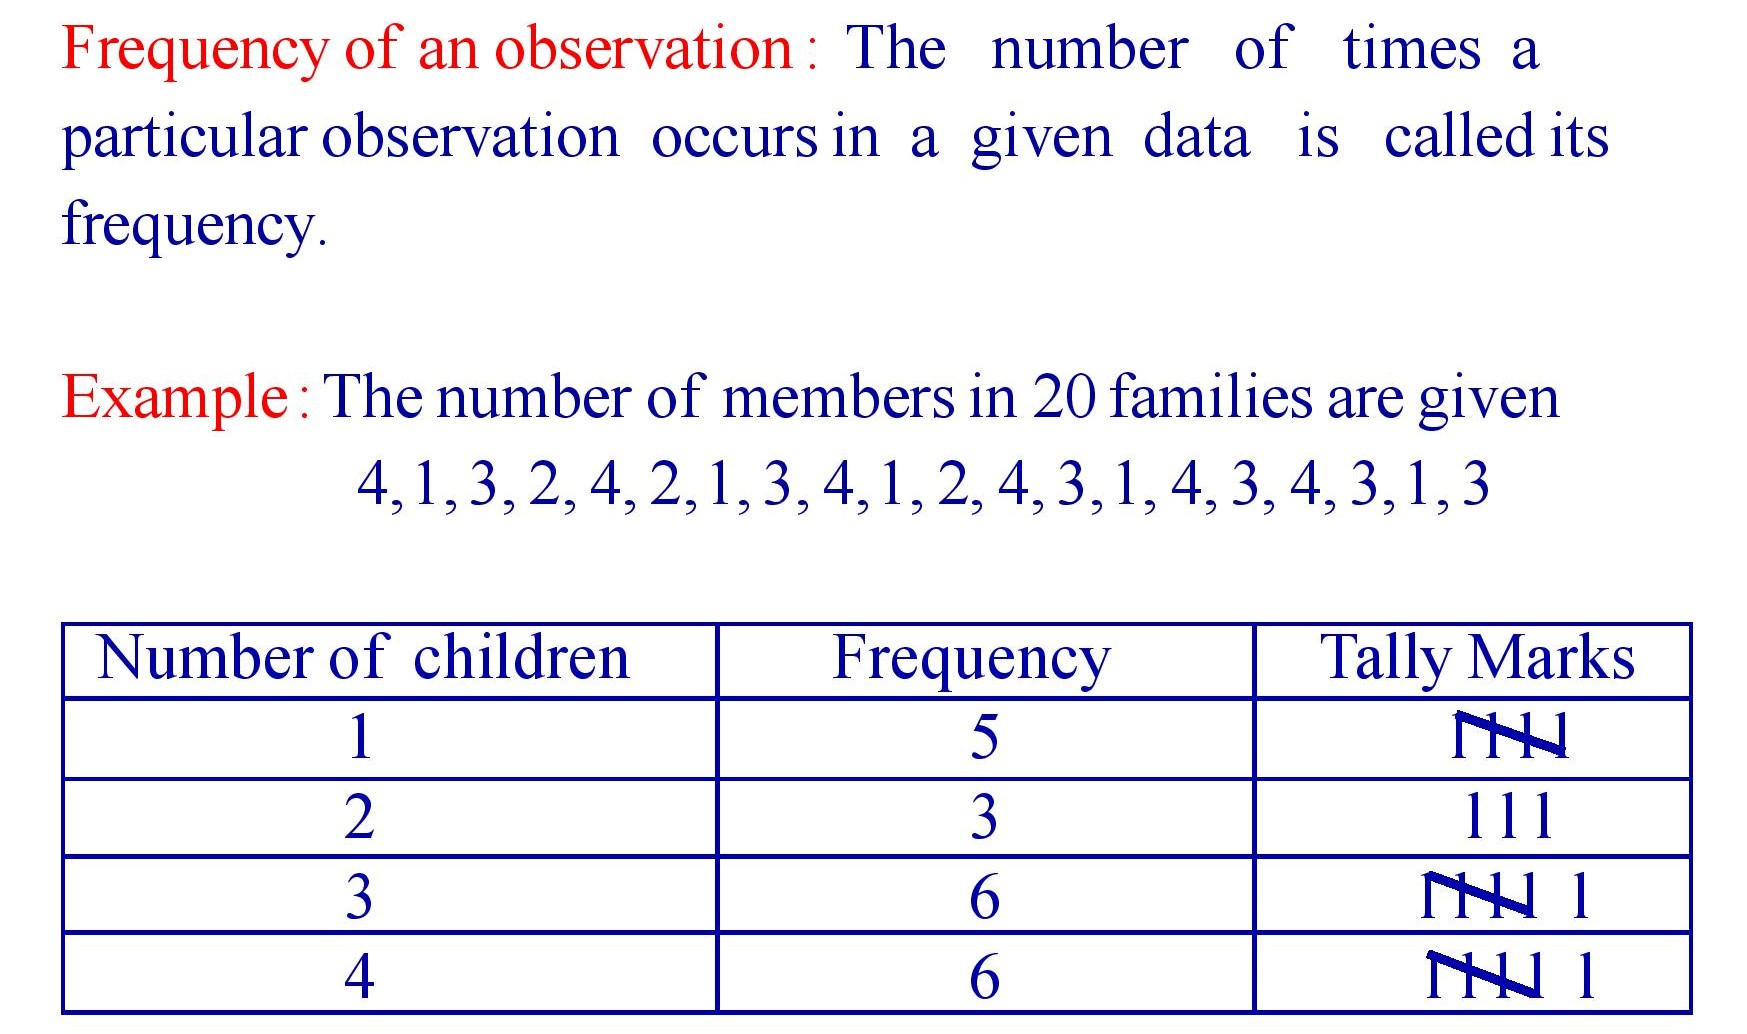 Frequency of an observation